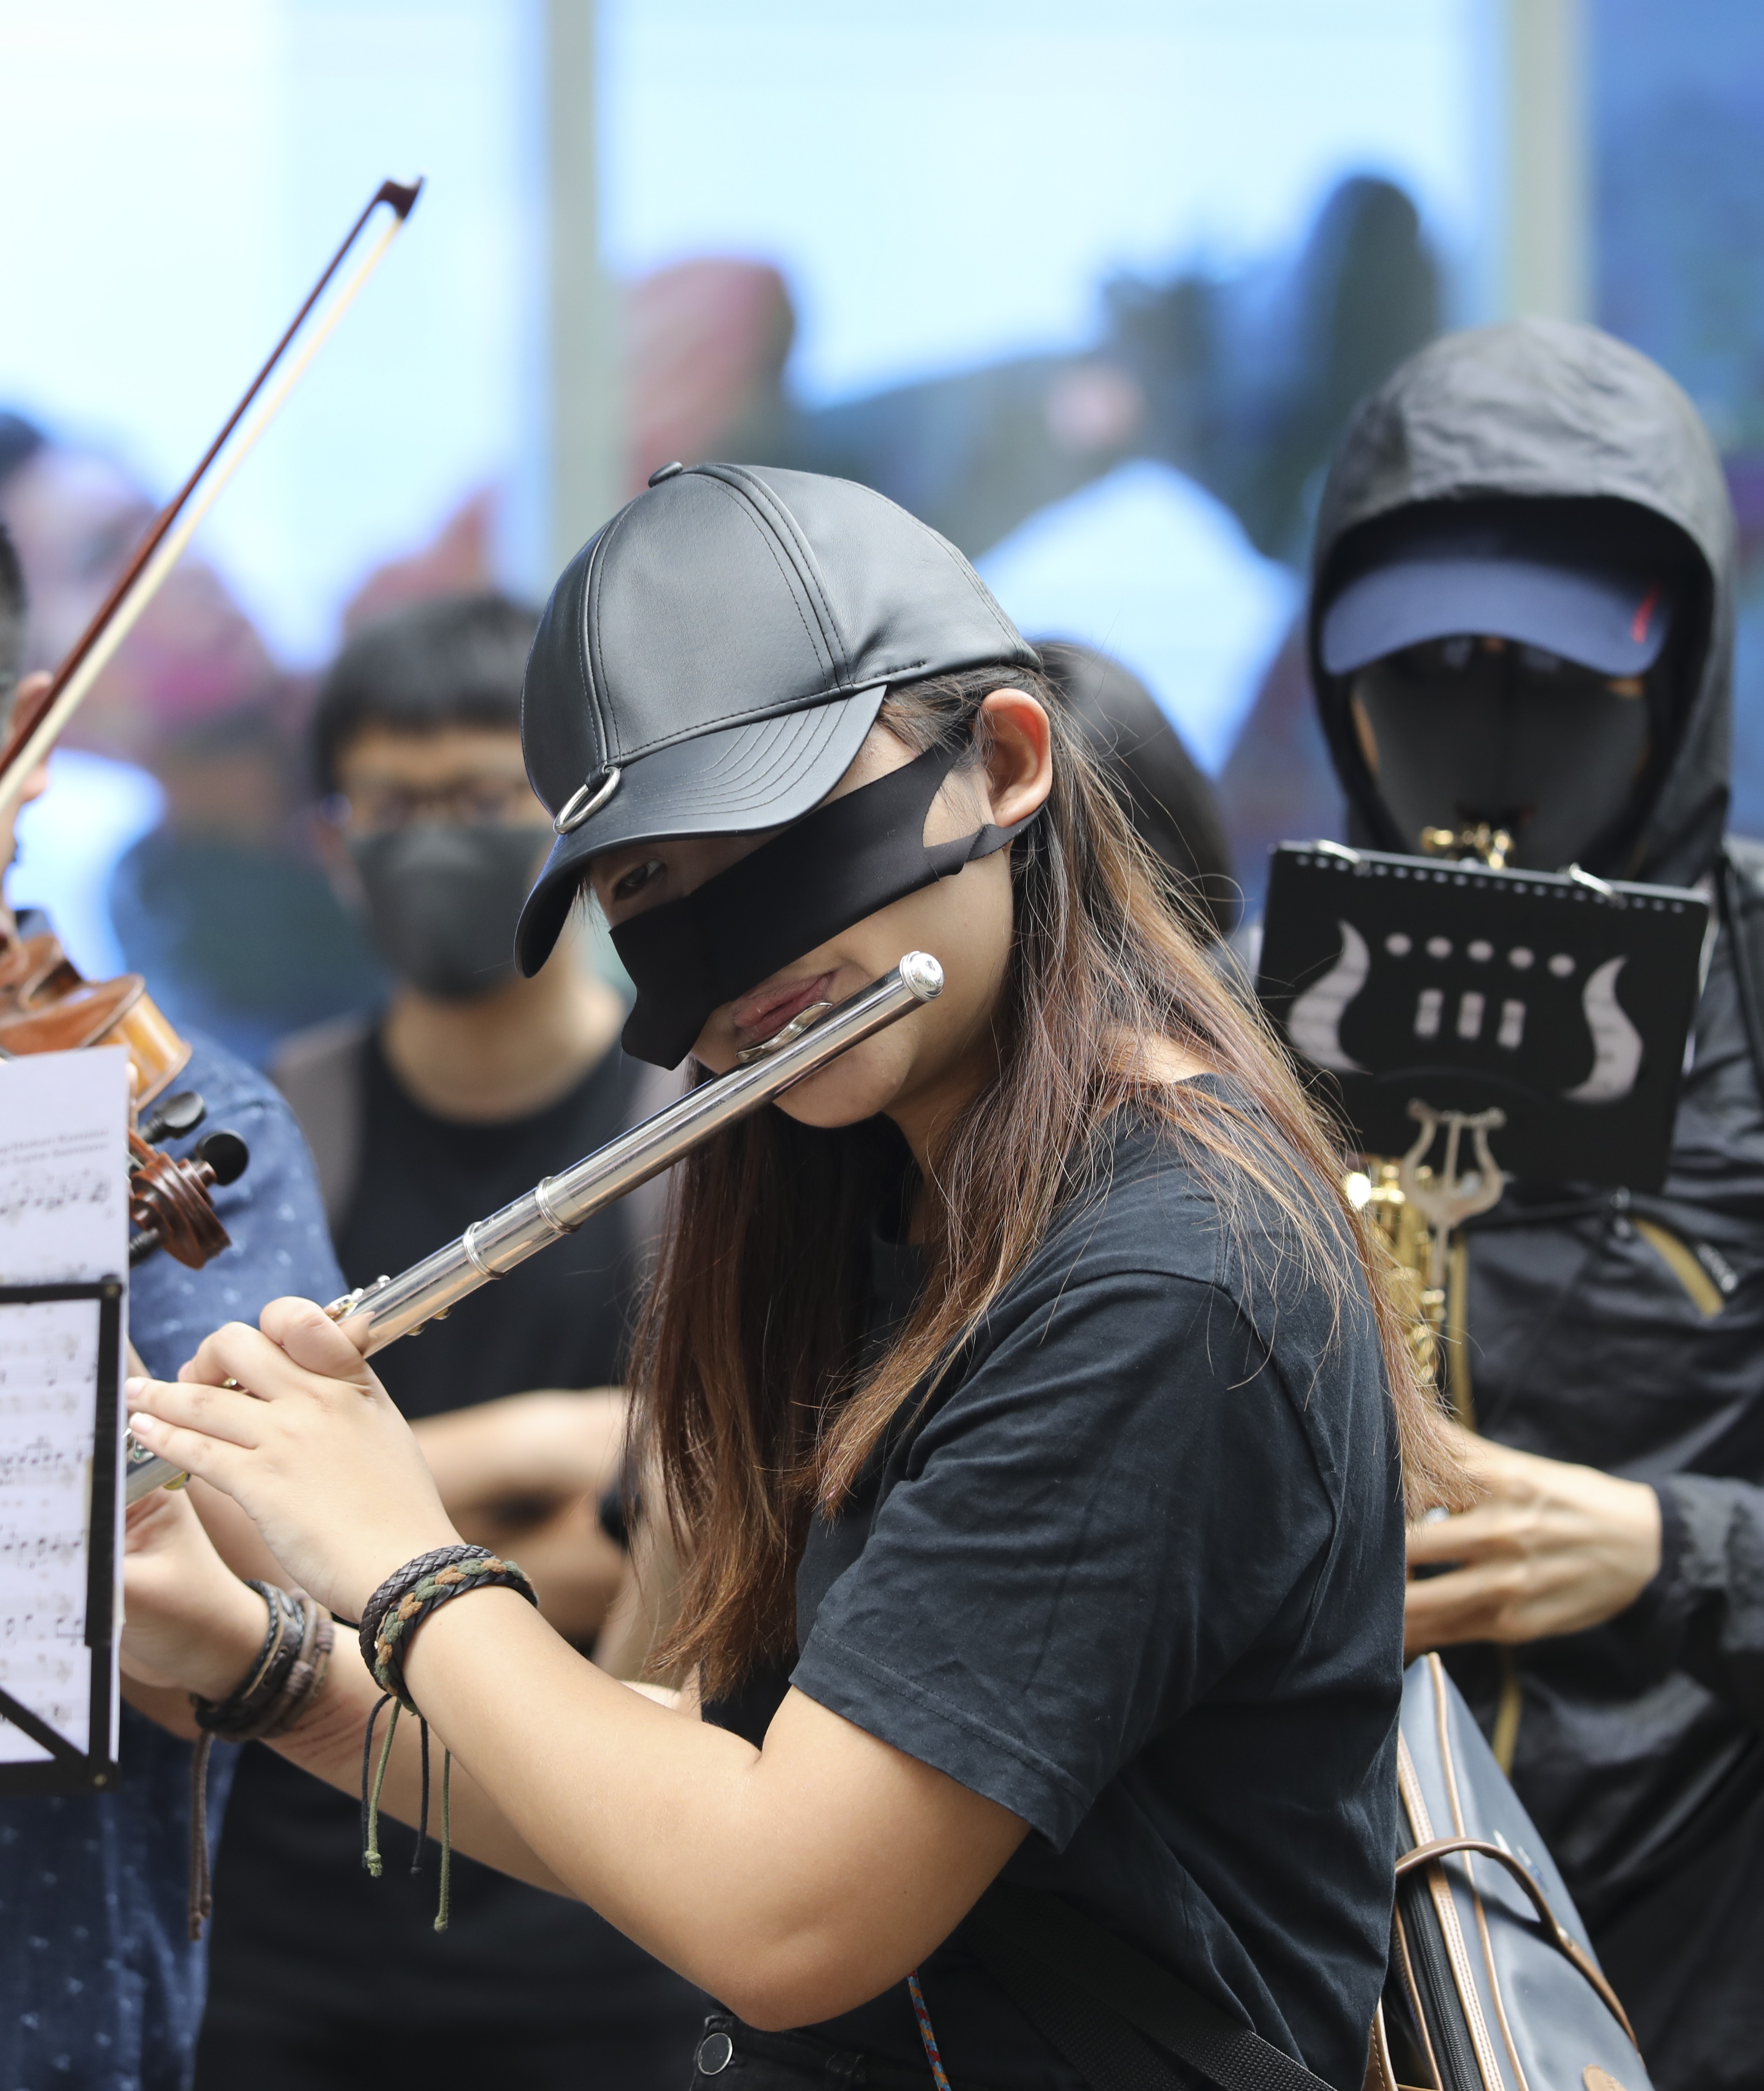 A lunchtime anti-government sing-along protest in Mong Kok on October 18. Photo: Dickson Lee